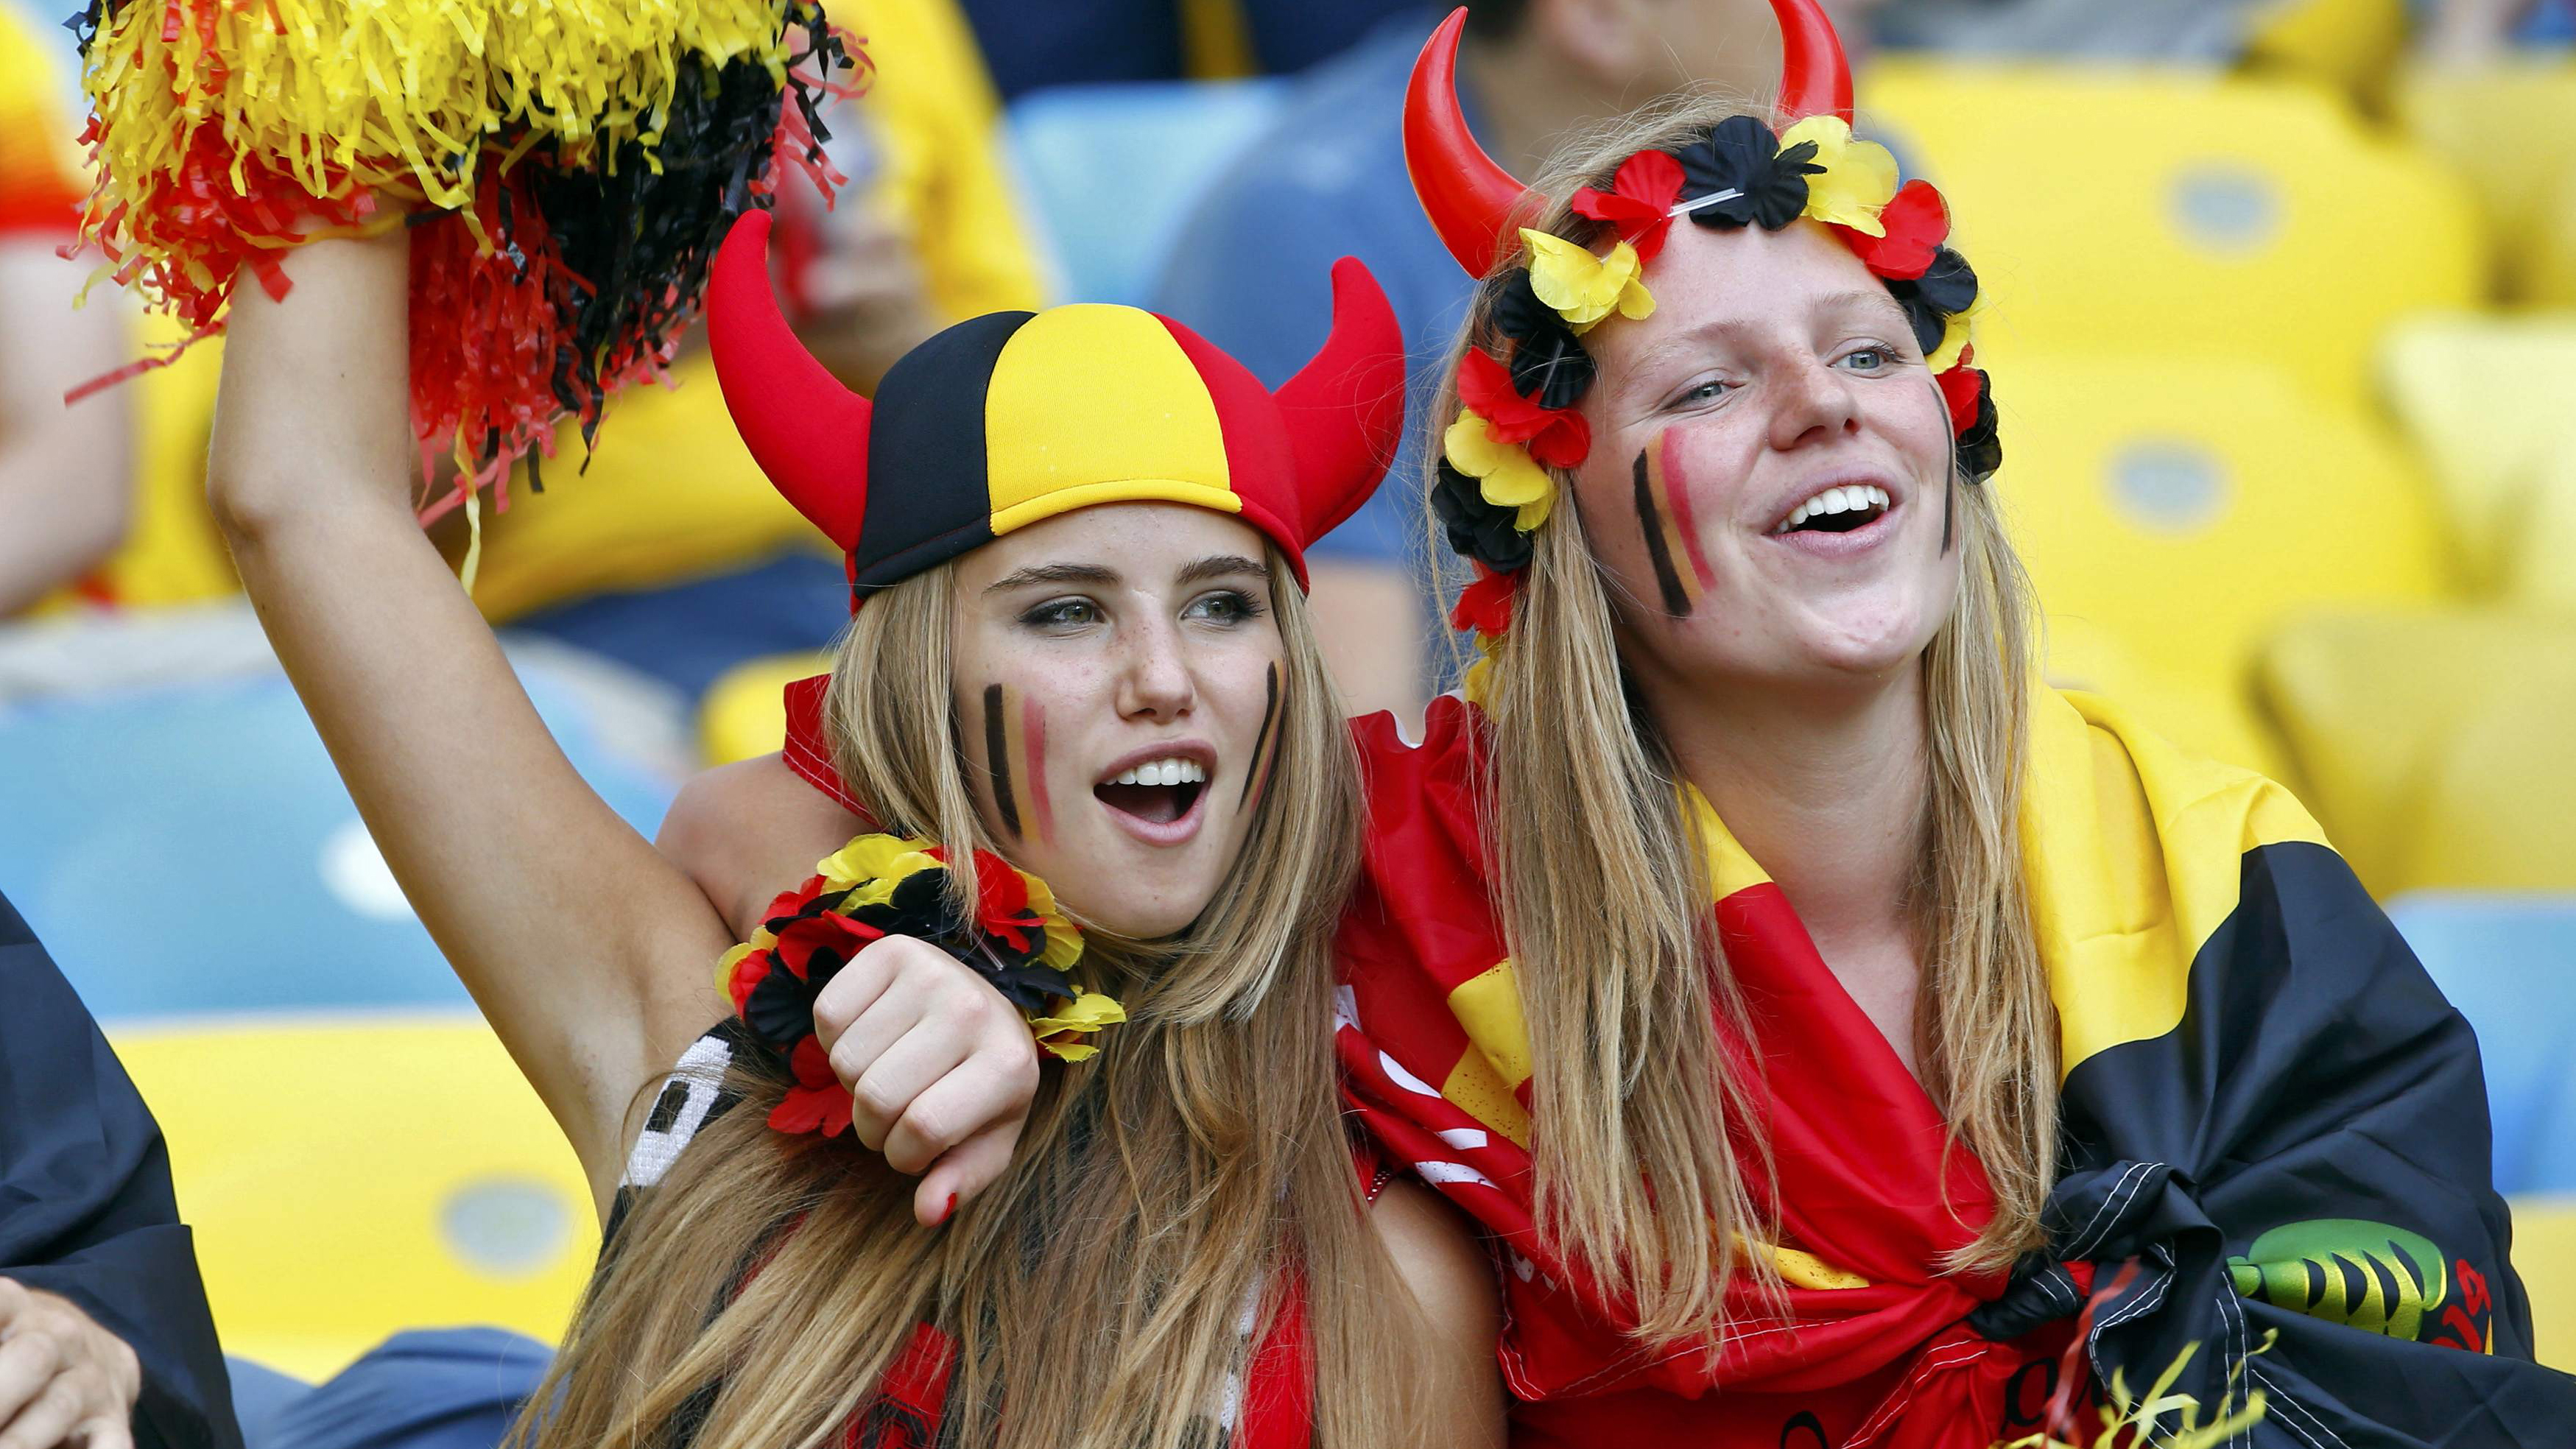 People 3498x1968 Axelle Despiegelaere women FIFA World Cup Belgium soccer girls fans blonde armpits hat women with hats funny hats open mouth